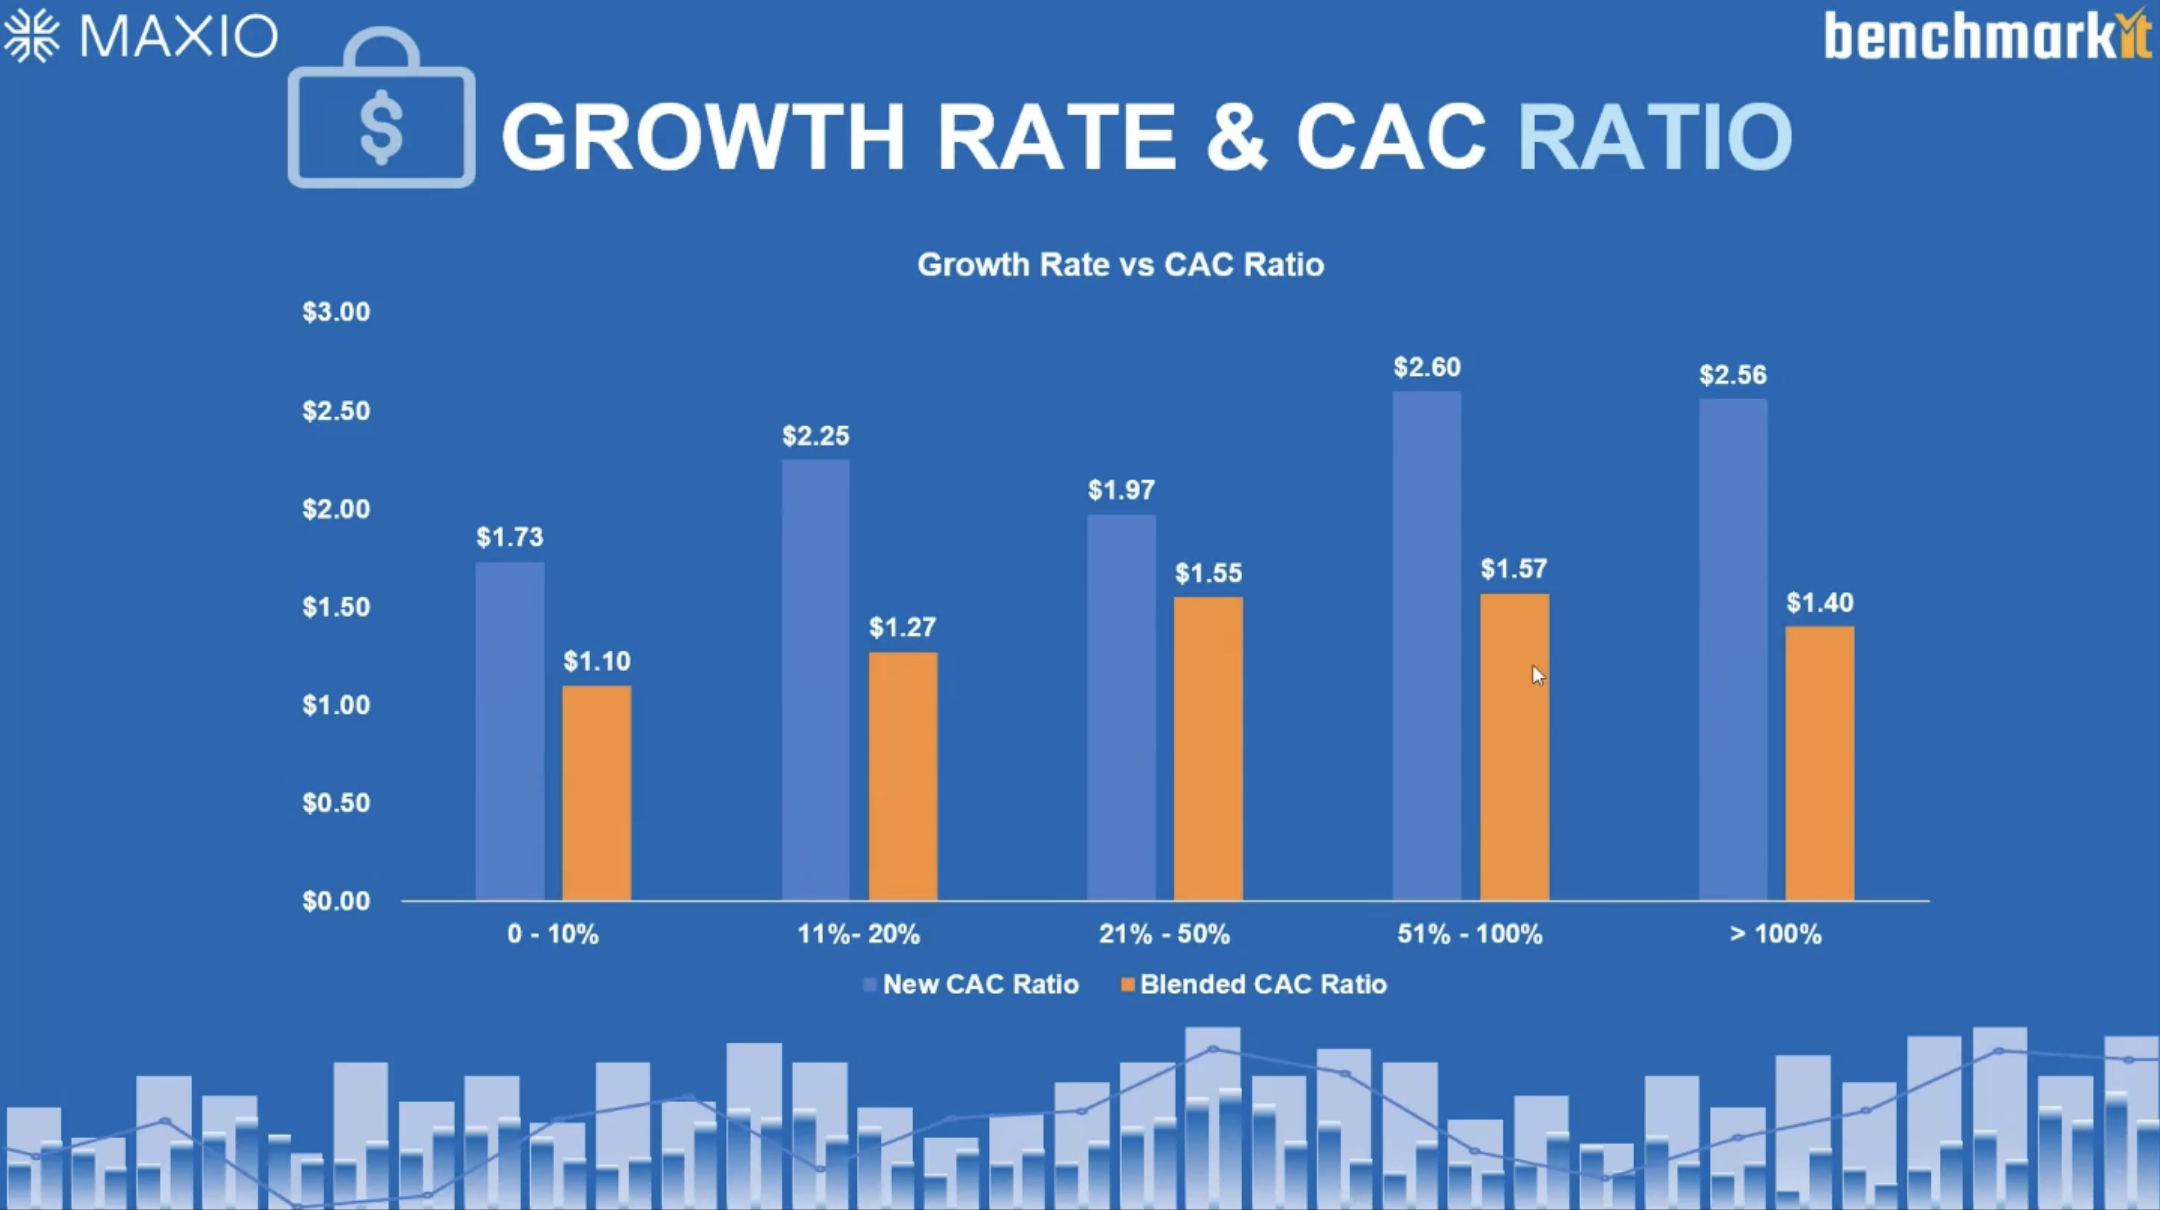 Maxio and Benchmarkit's FY-2022 Growth Rate and CAC Ratio chart